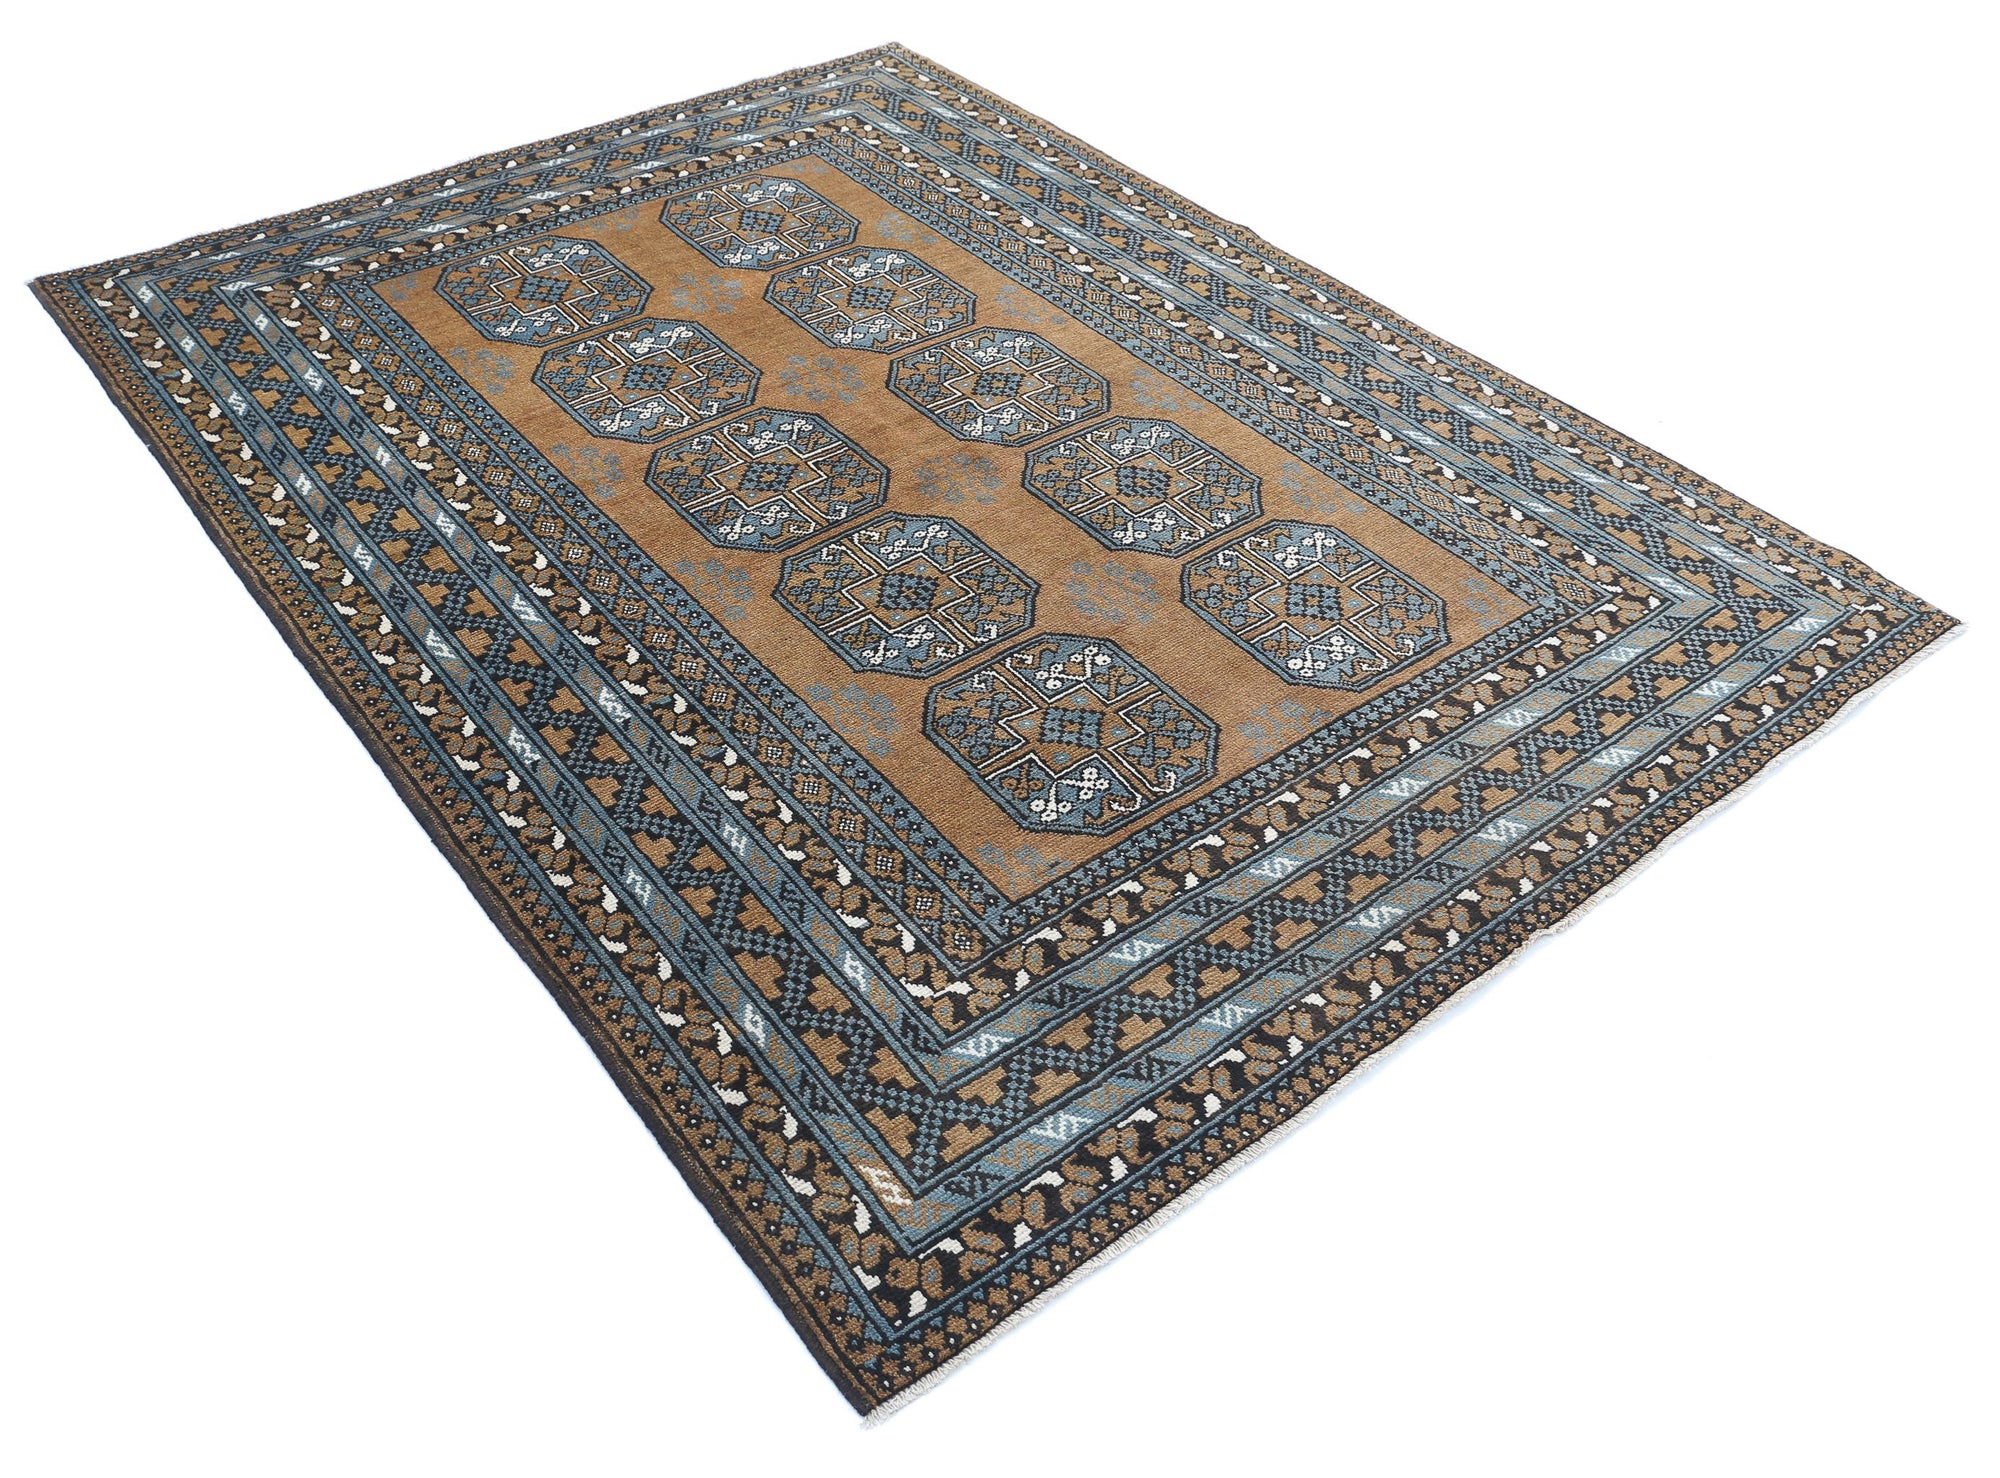 Revival-hand-knotted-gul-collection-wool-rug-5013943-1.jpg